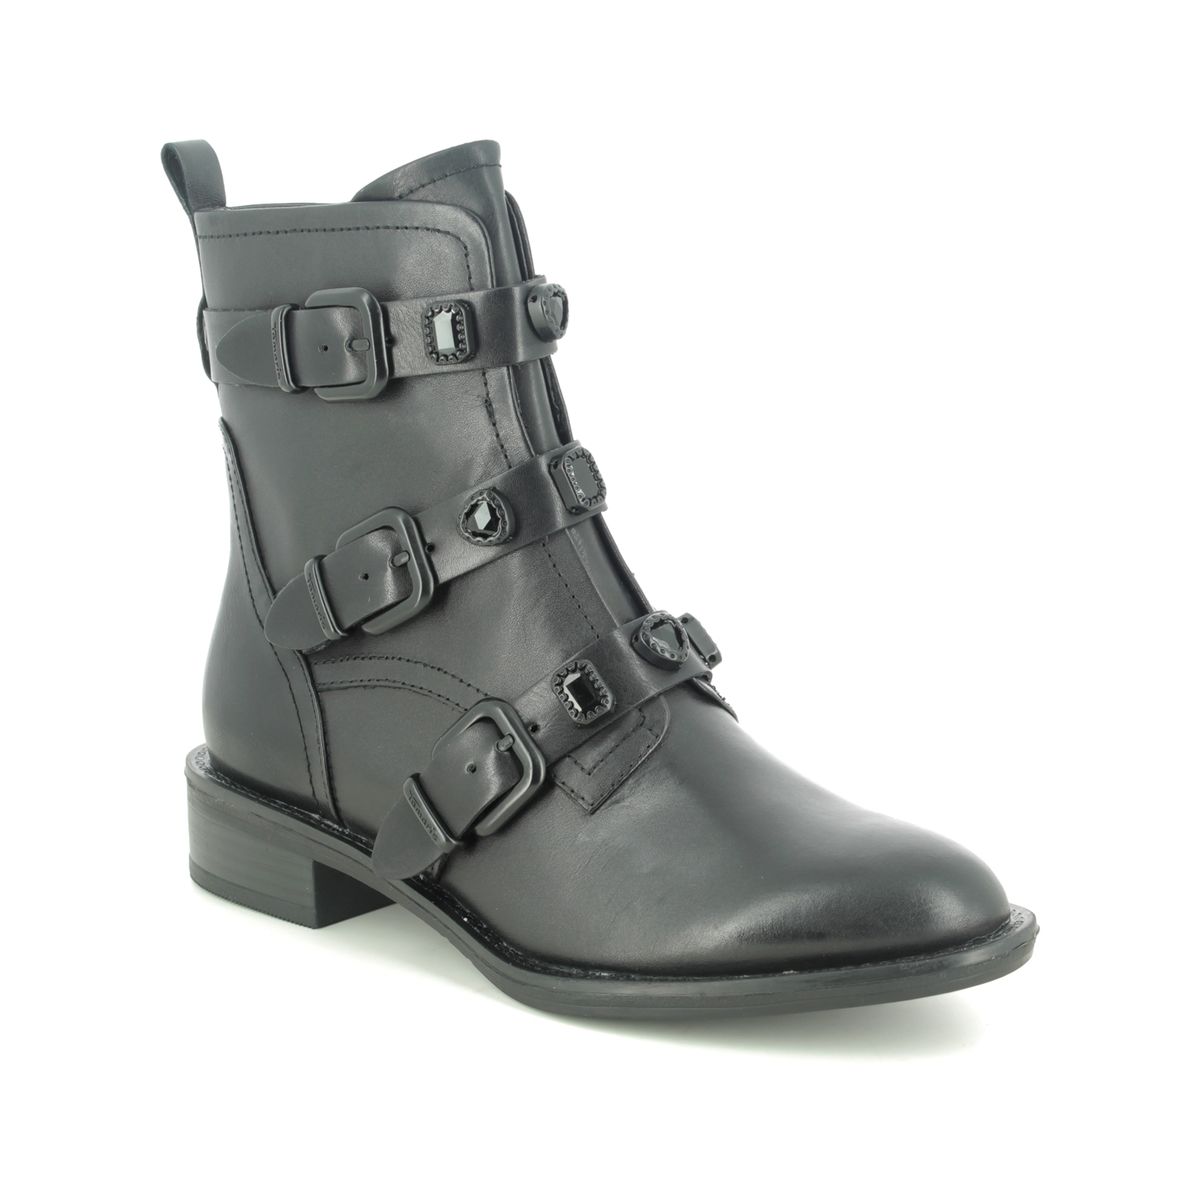 Tamaris Manisa Black leather Womens Ankle Boots 25415-25-007 in a Plain Leather in Size 40